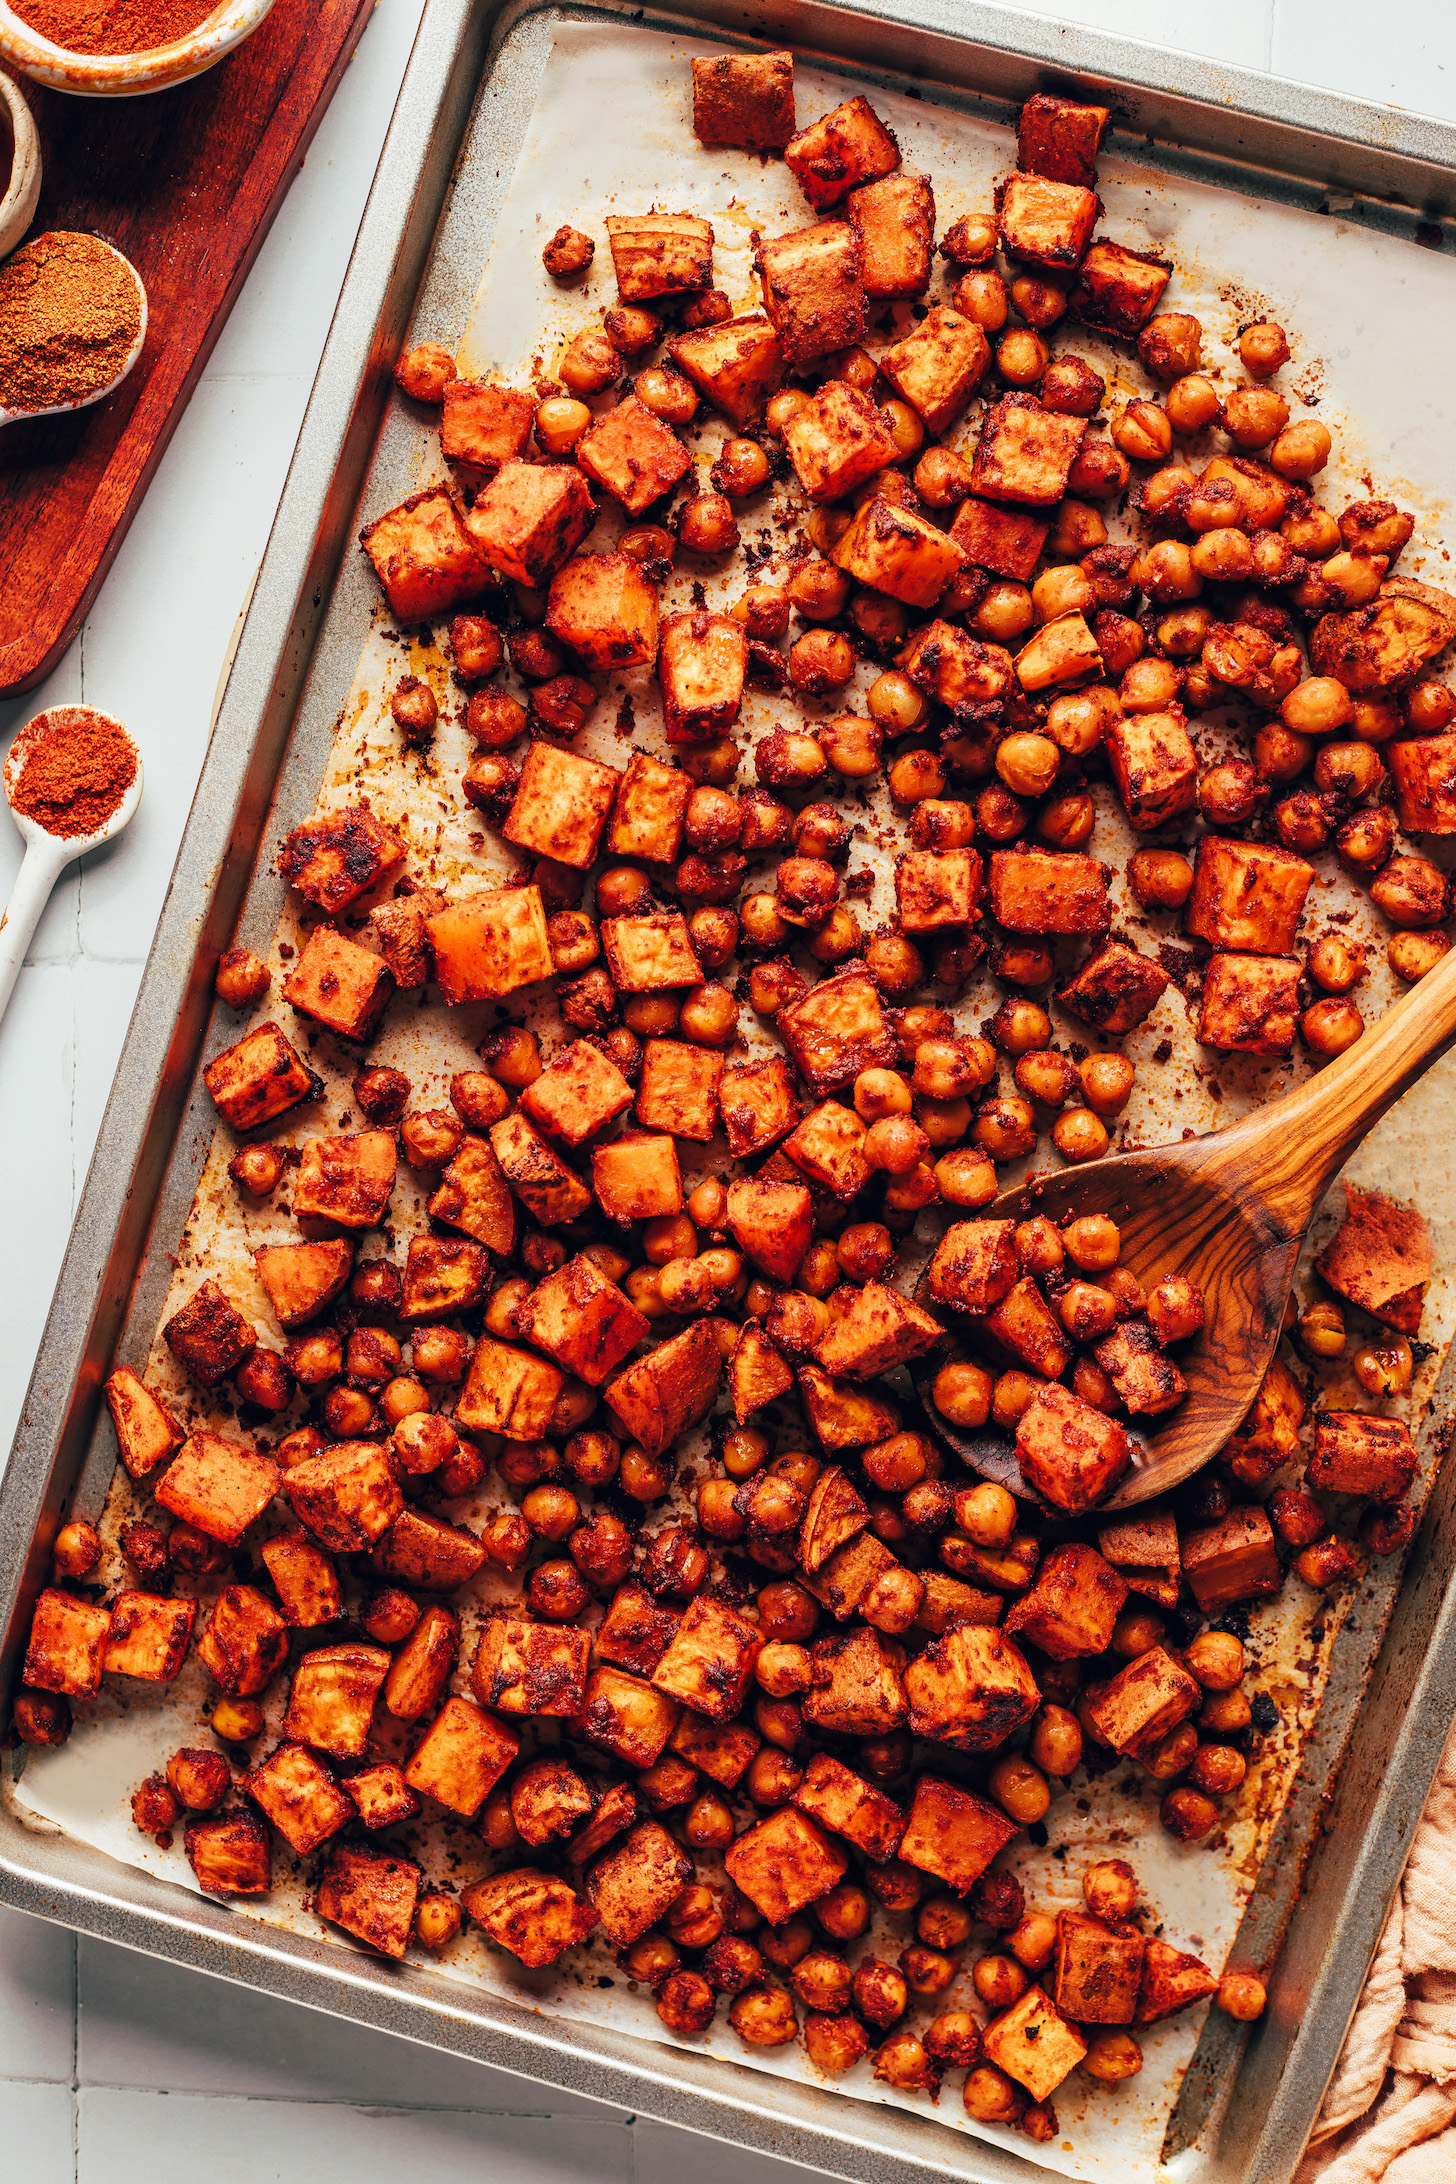 Baking sheet of BBQ roasted chickpeas and sweet potatoes